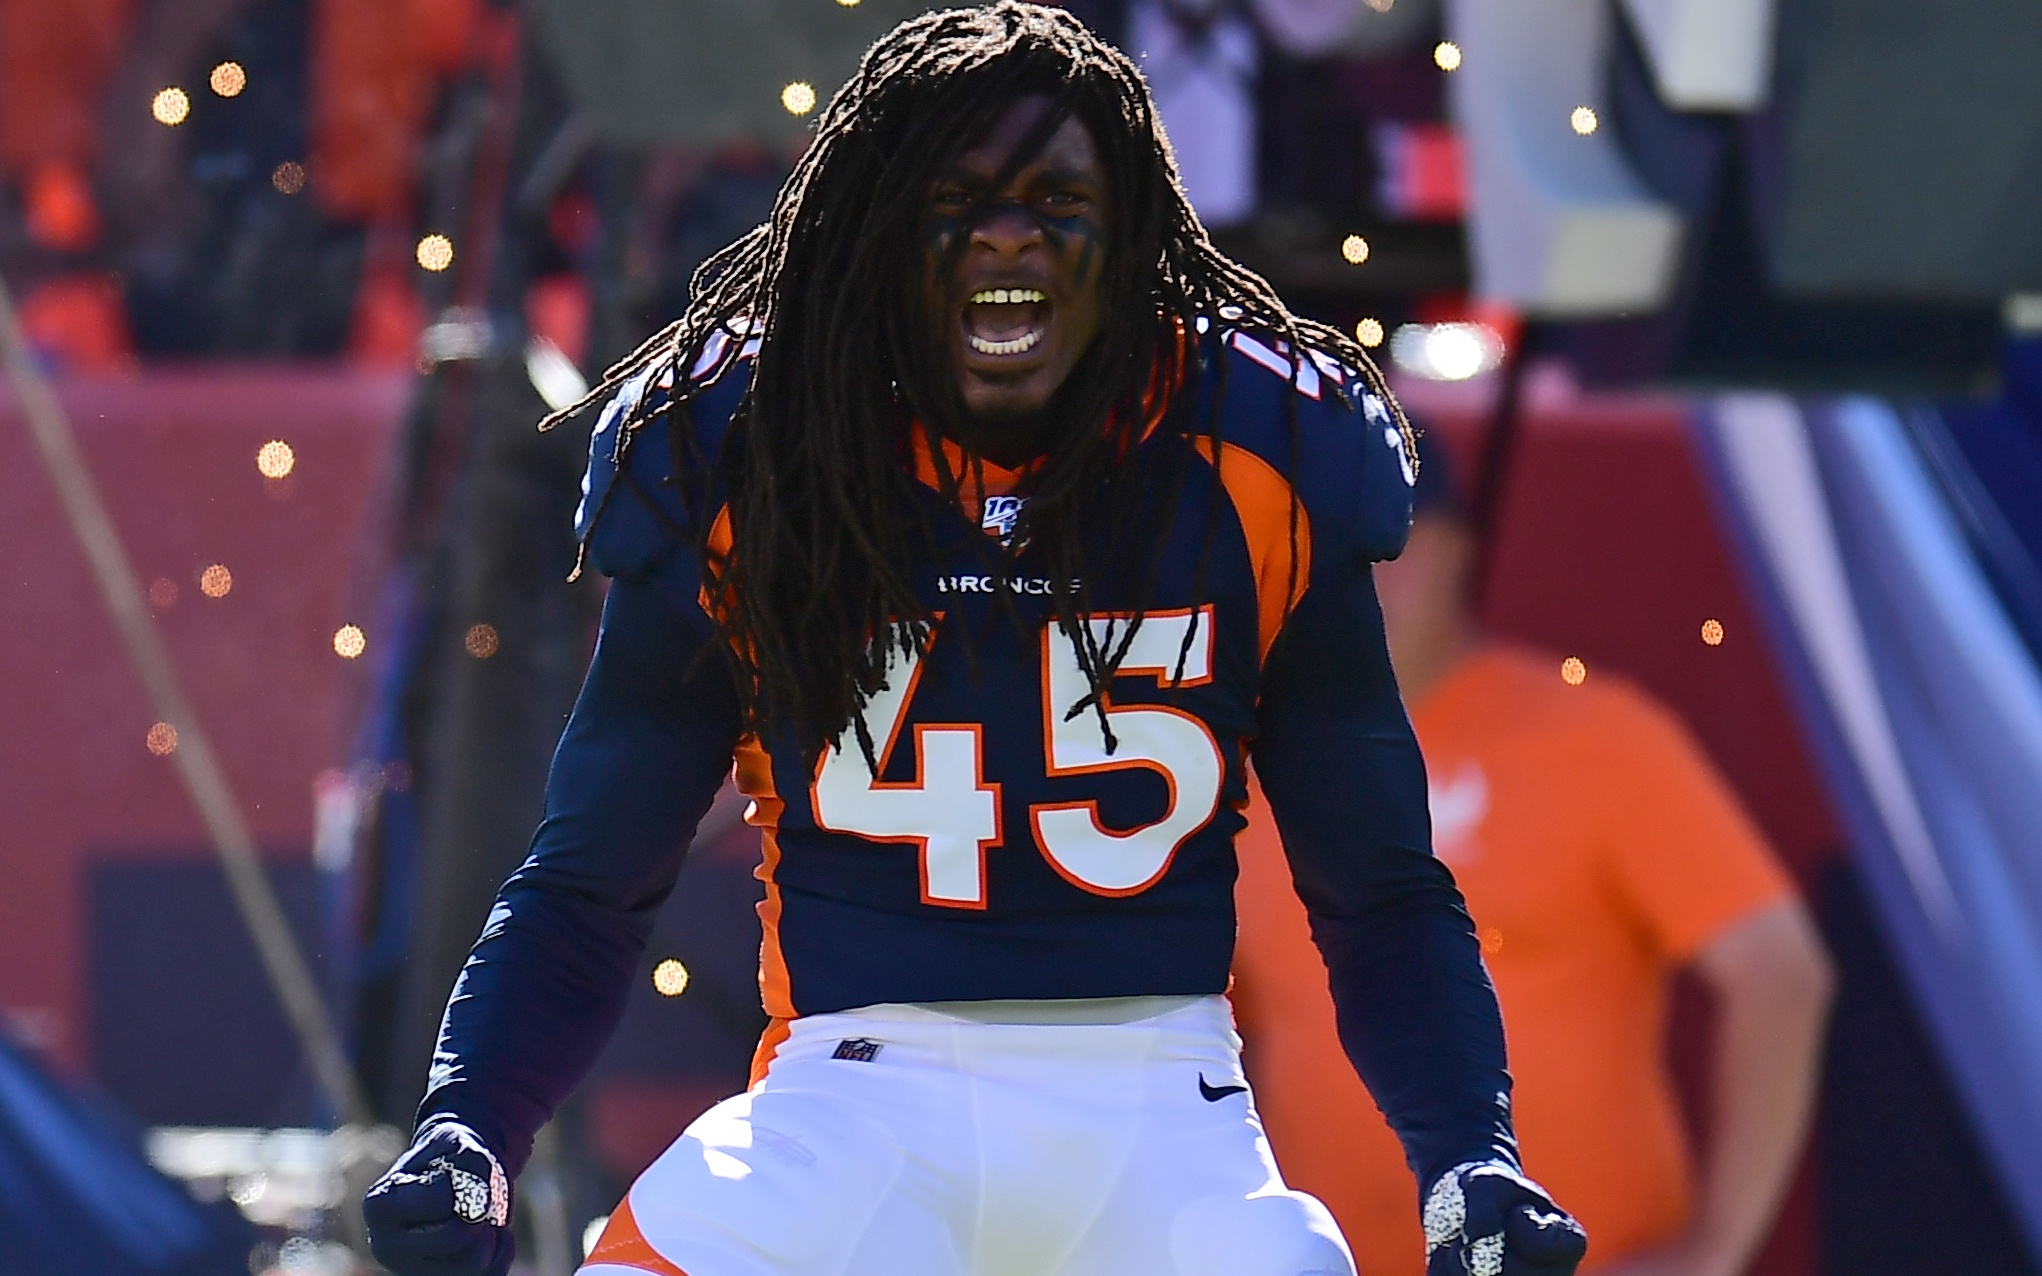 Alexander "Dino" Johnson roars before the Broncos - Titans game last week. Credit: Ron Chenoy, USA TODAY Sports.